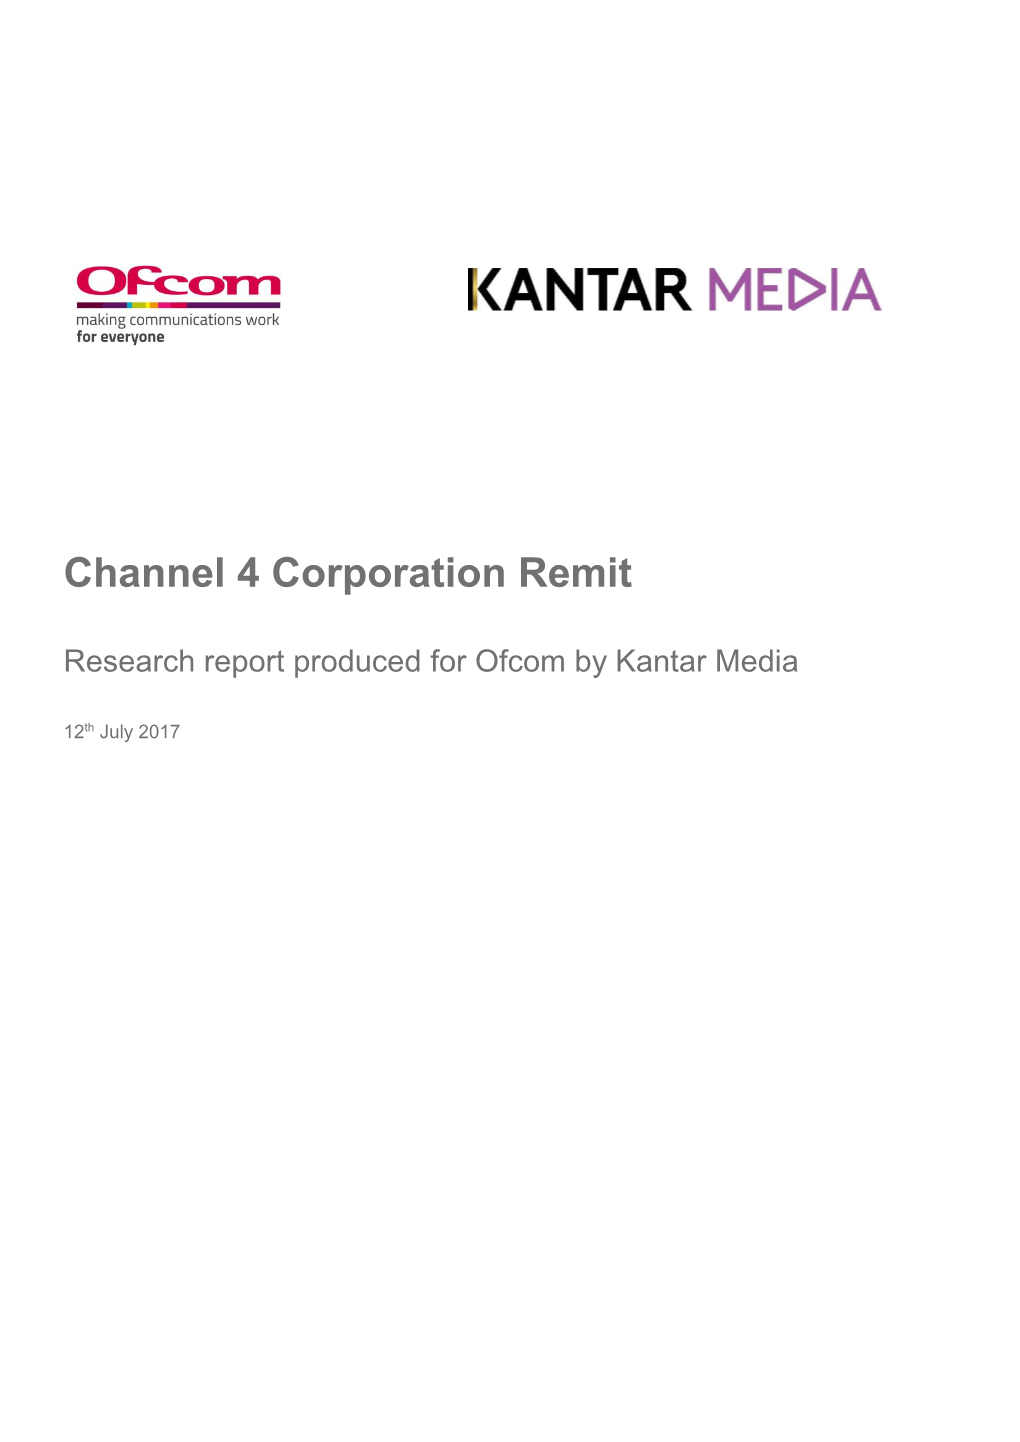 Channel 4 Corporation Remit Research Report 2017